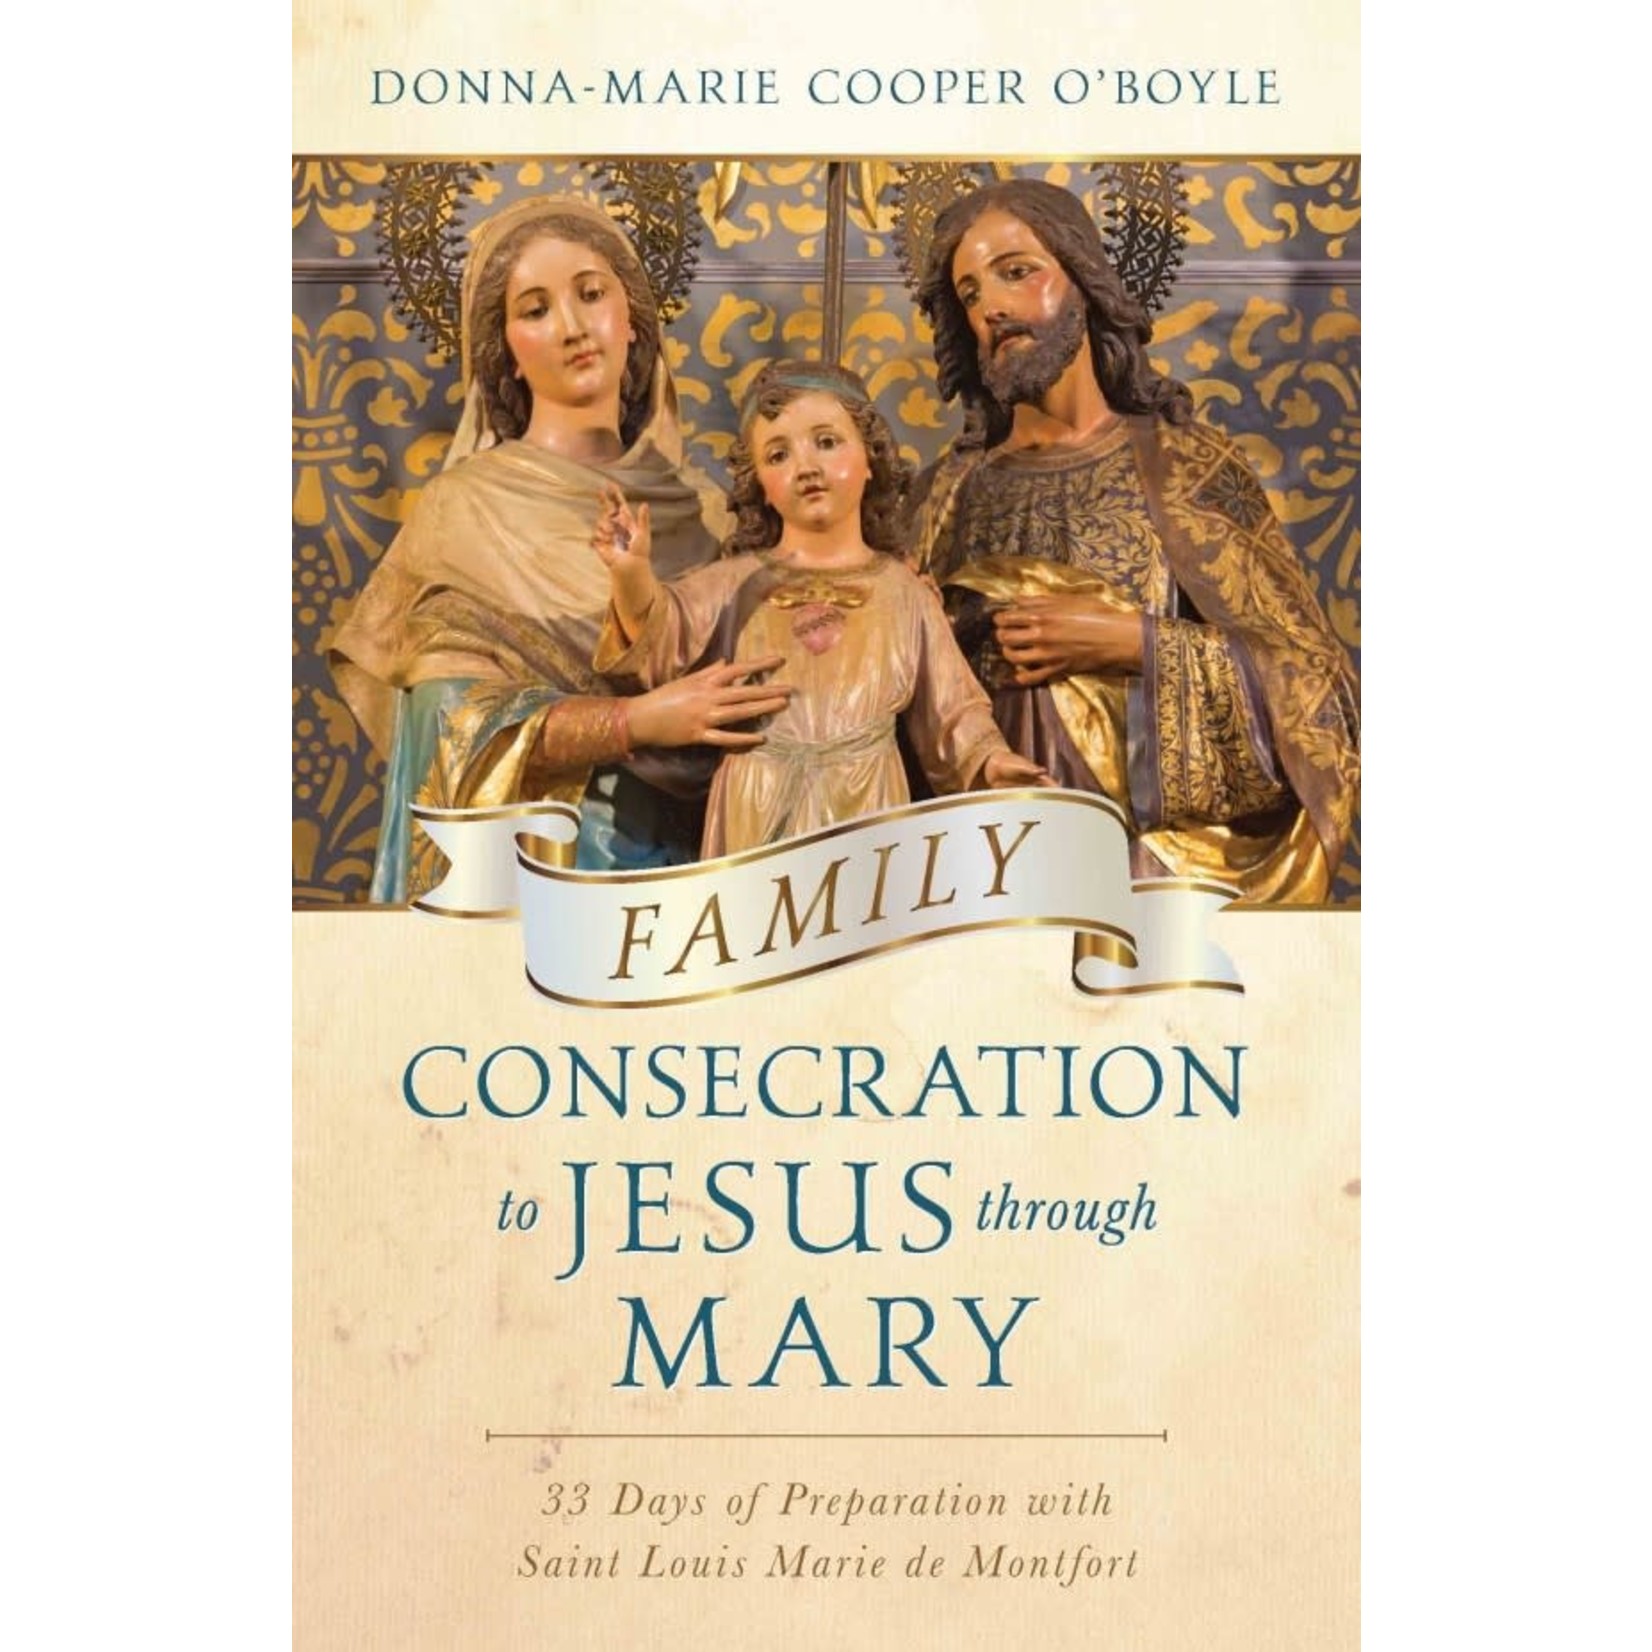 Family Consecration to Jesus through Mary